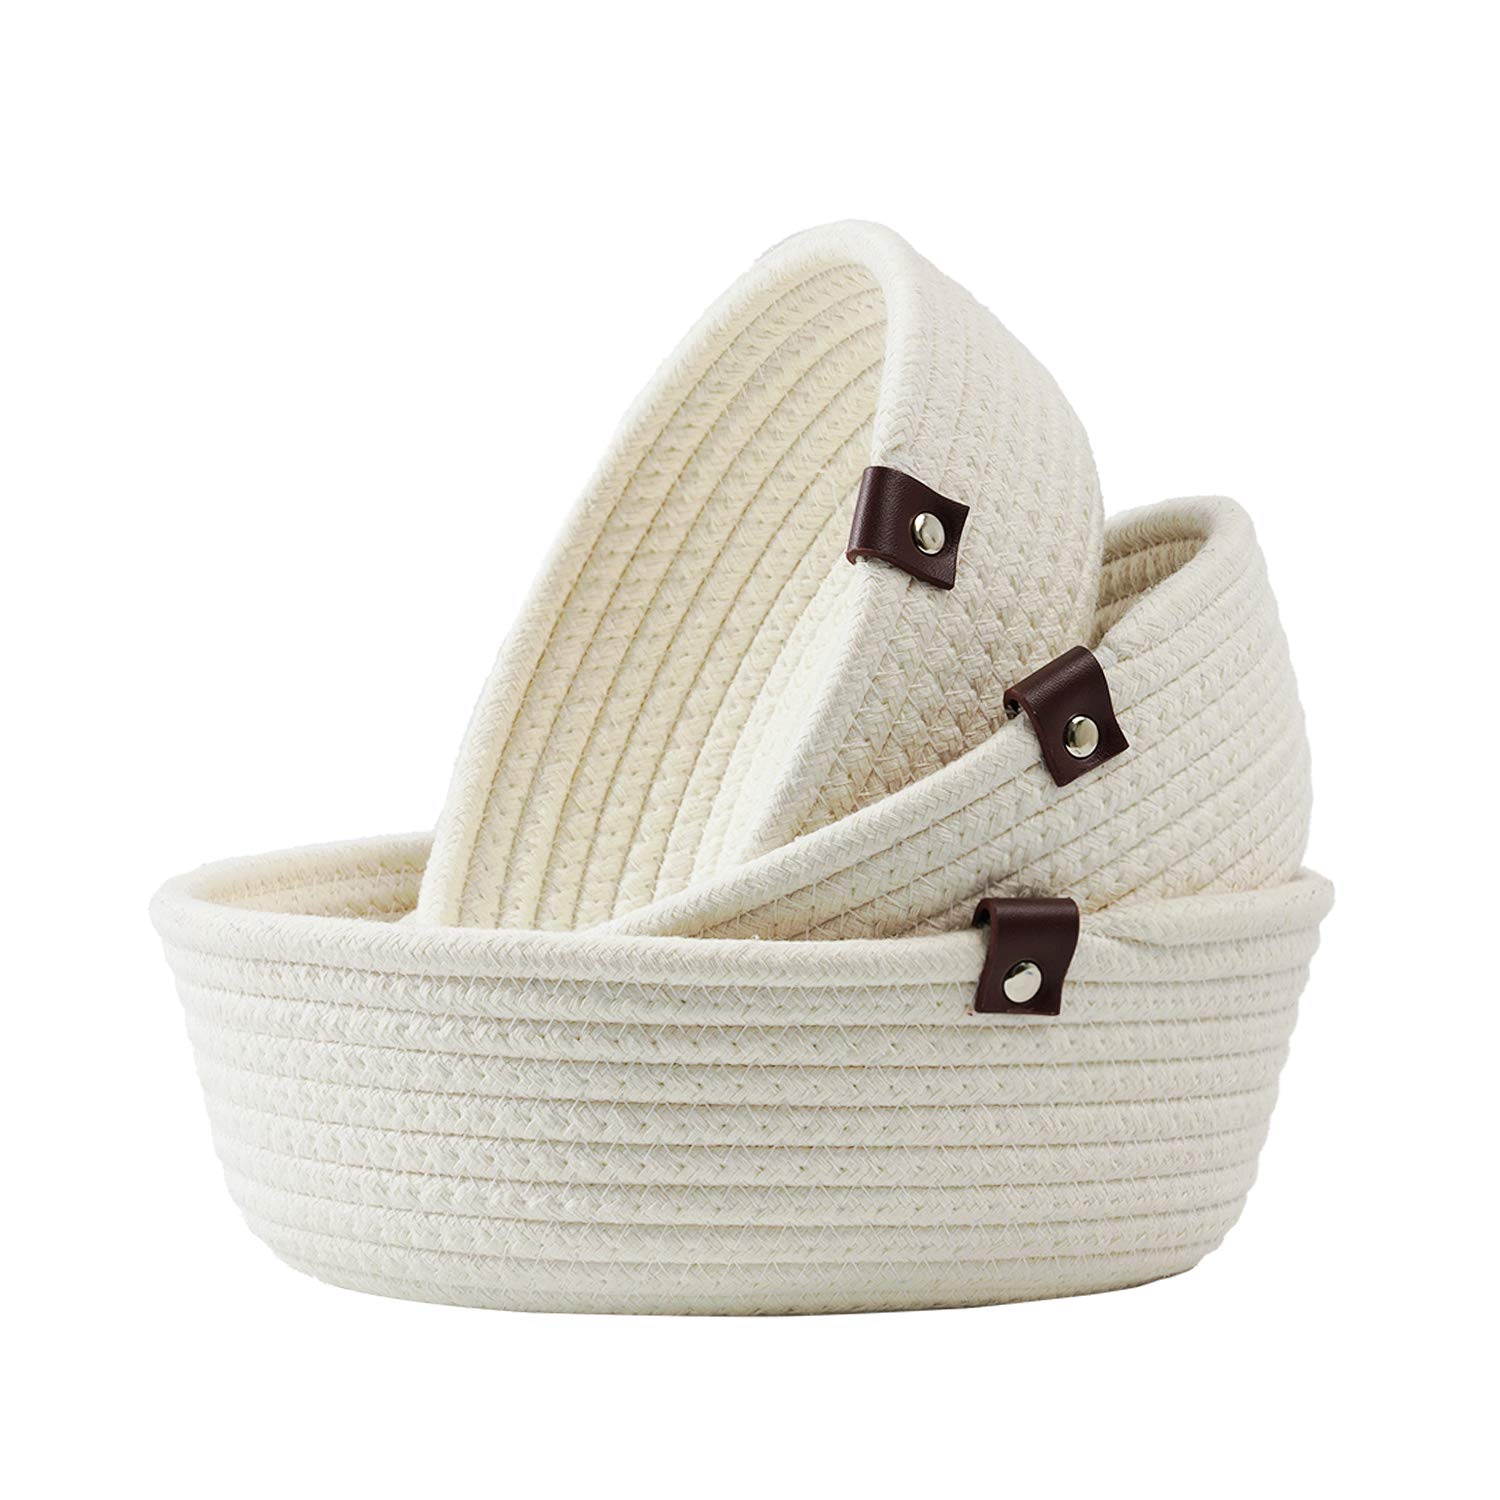 Goodpick Machine Washable Cotton Rope Table Baskets, 3-Pack